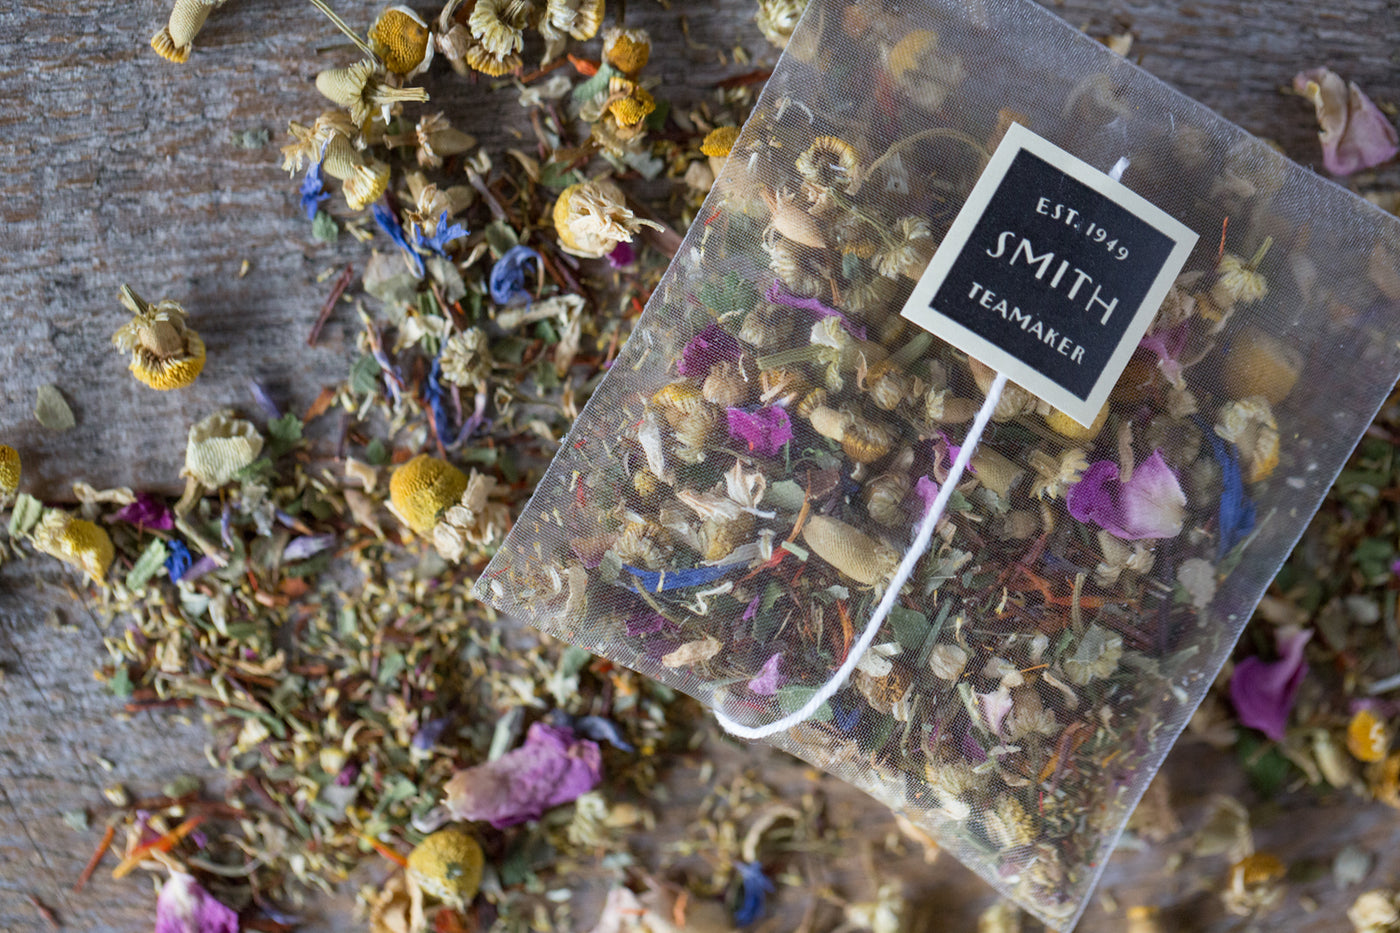 Unwrapped sachet of Meadow to show full leaf botanicals: chamomile buds, rose petals and blue cyani.